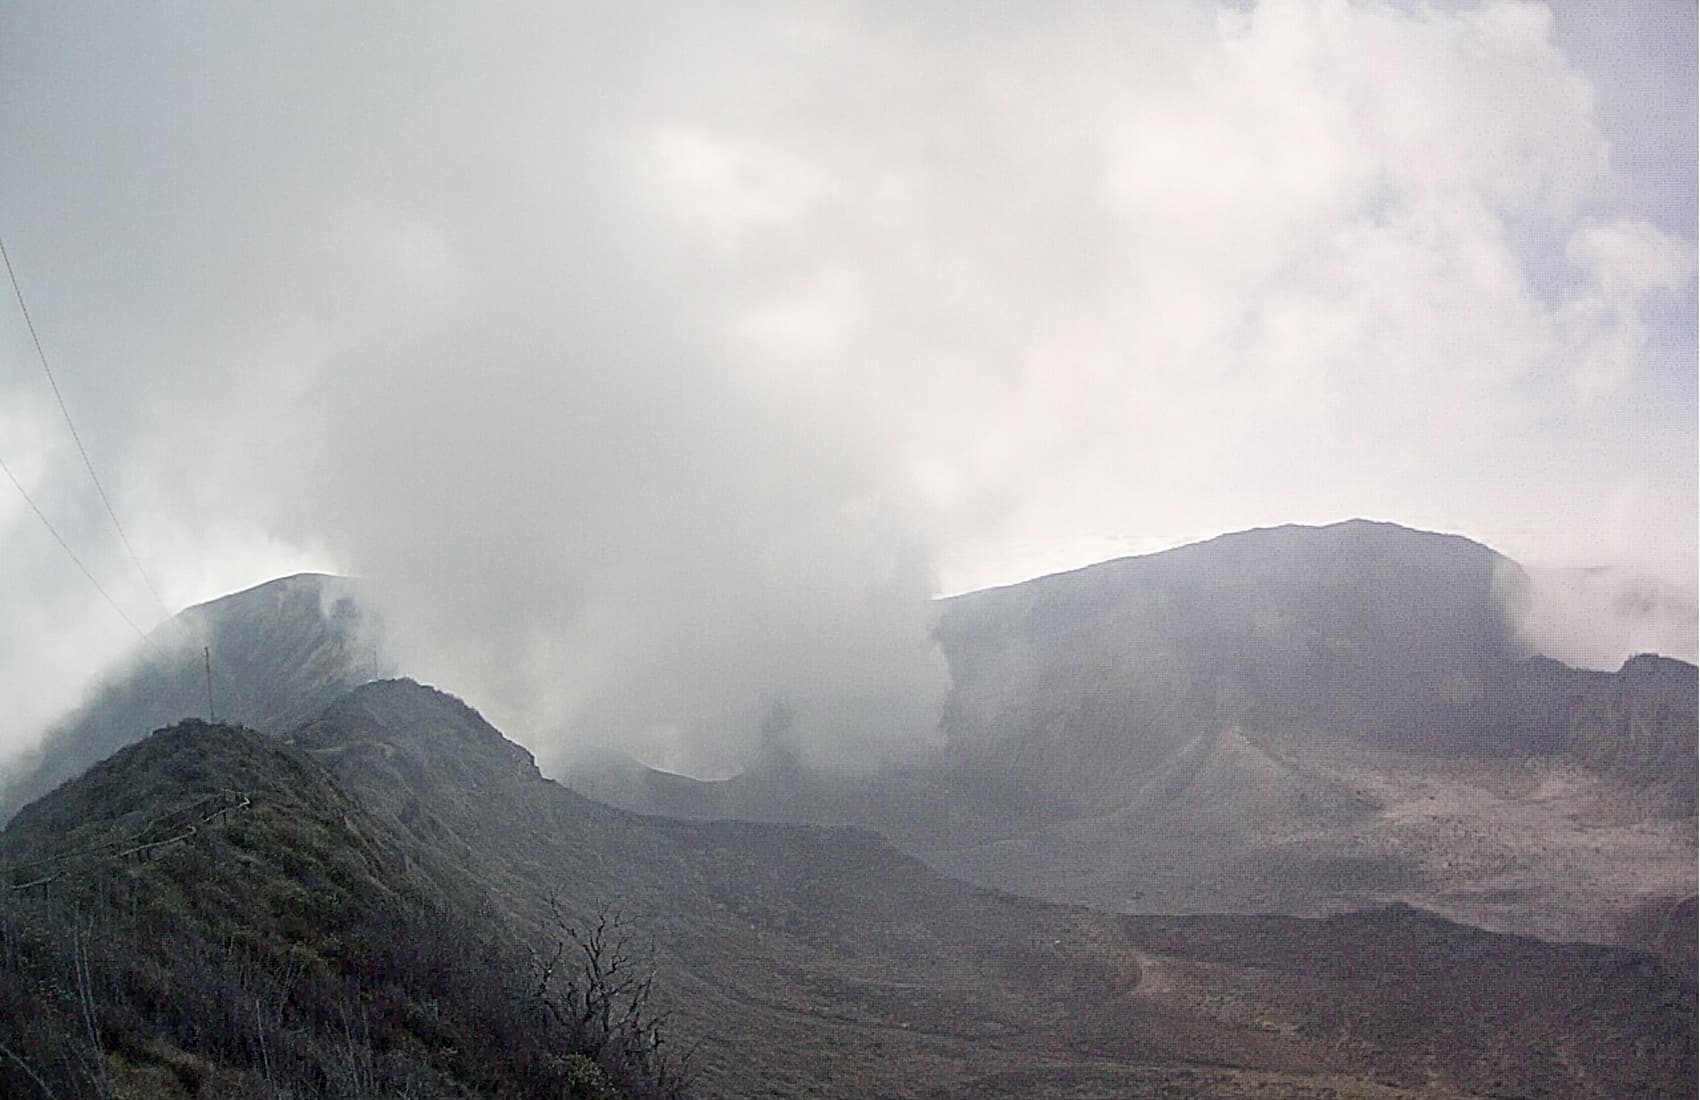 Vapor and ash columns were visible coming out of the Turrialba Volcano's crater at 4:43 p.m. on March 19, 2015.